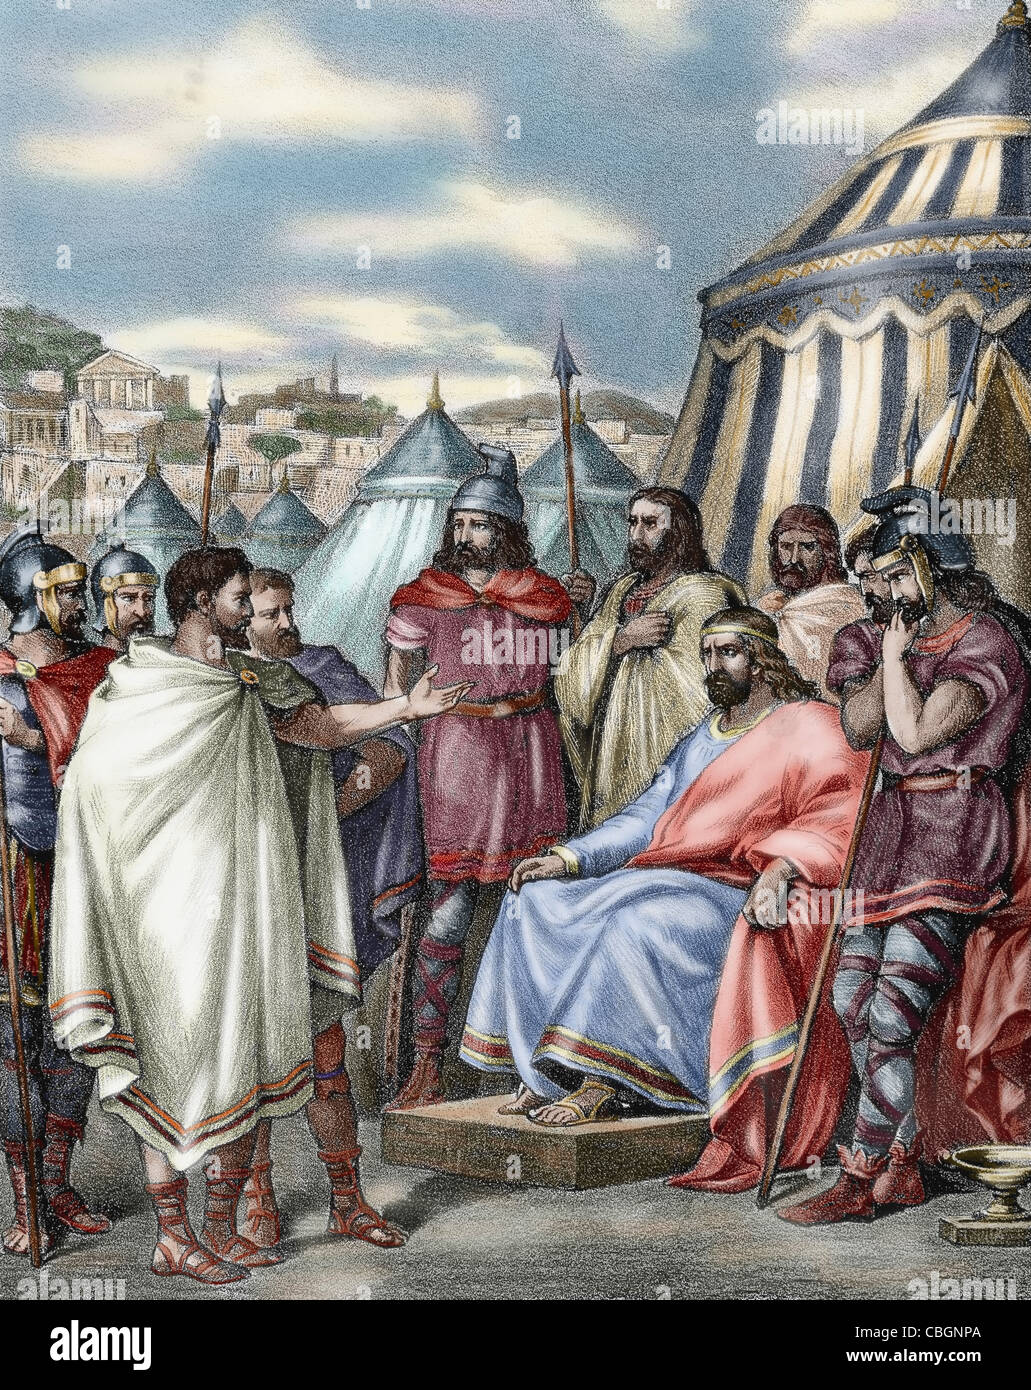 Sack of Rome by the Visigoths led by Alaric I in 410, during the reign of Emperor Honorius. Colored engraving. Stock Photo